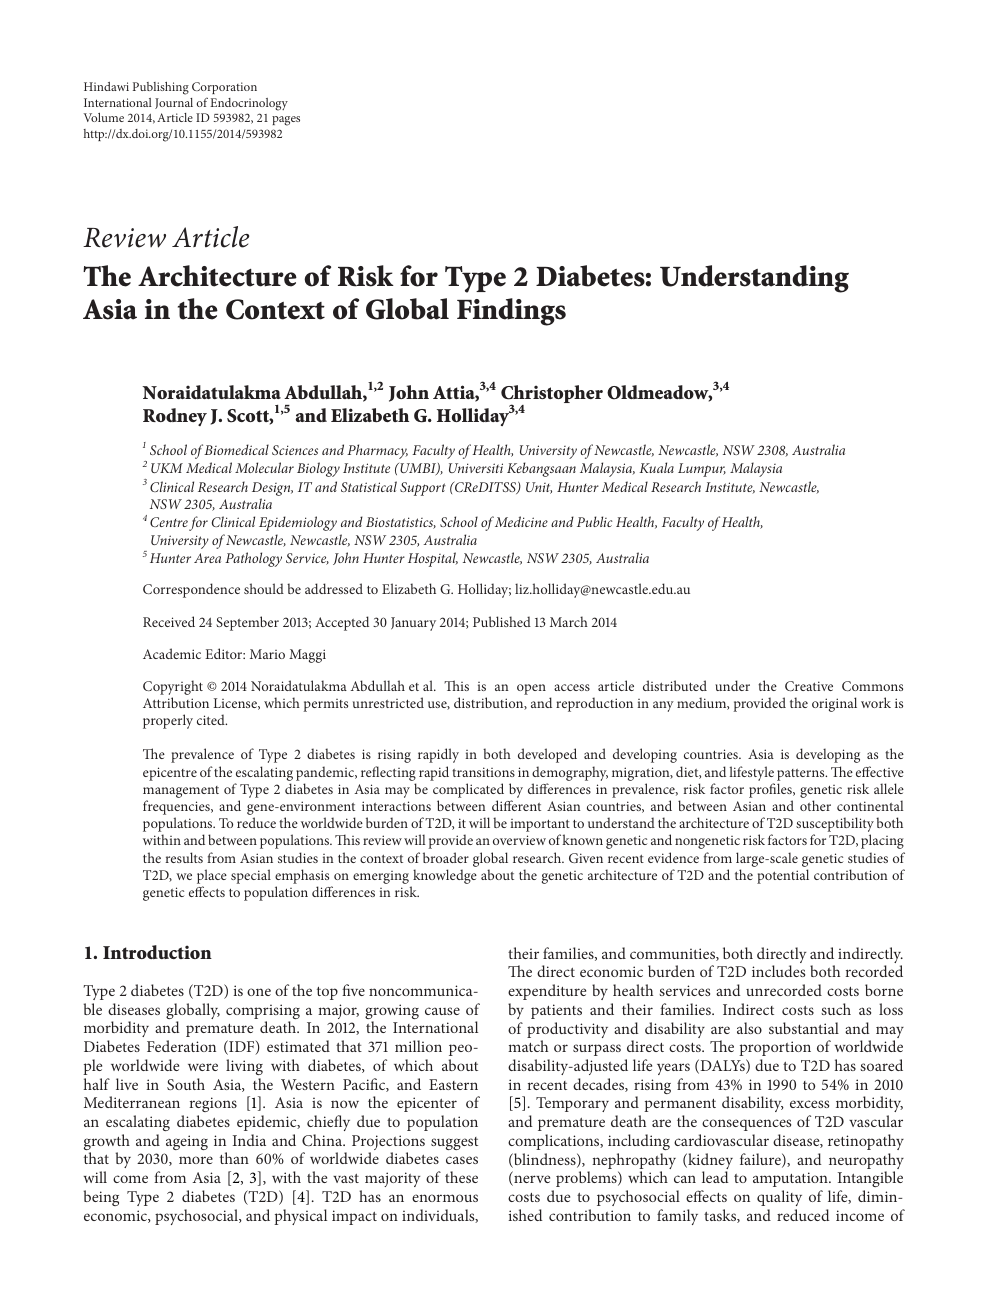 The Architecture Of Risk For Type 2 Diabetes Understanding Asia In The Context Of Global Findings Topic Of Research Paper In Biological Sciences Download Scholarly Article Pdf And Read For Free